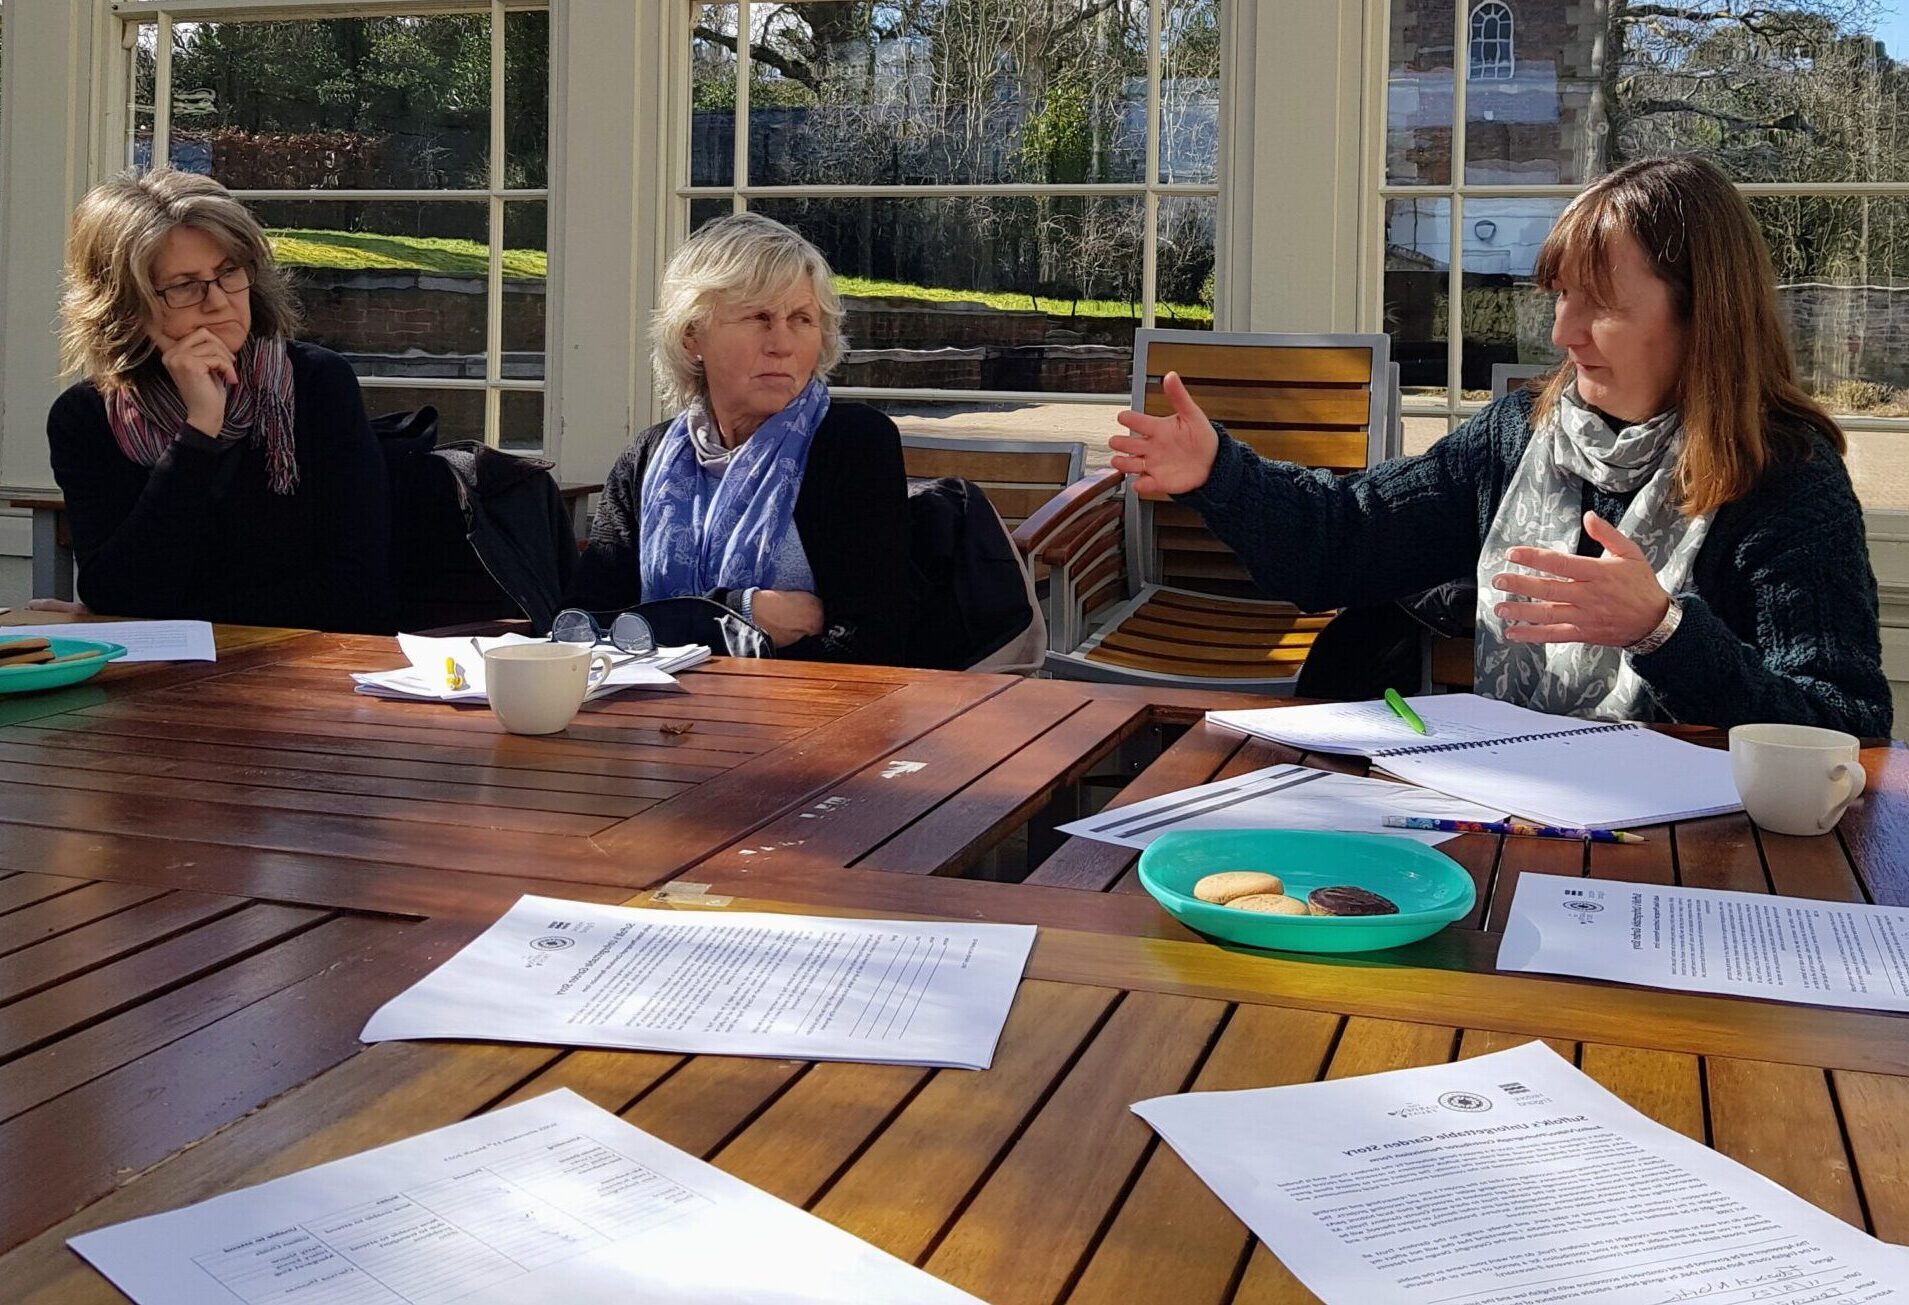 Suffolk based research volunteers sitting around a table with papers of their research, engaged in discussion inside a sunny outdoor glasshouse